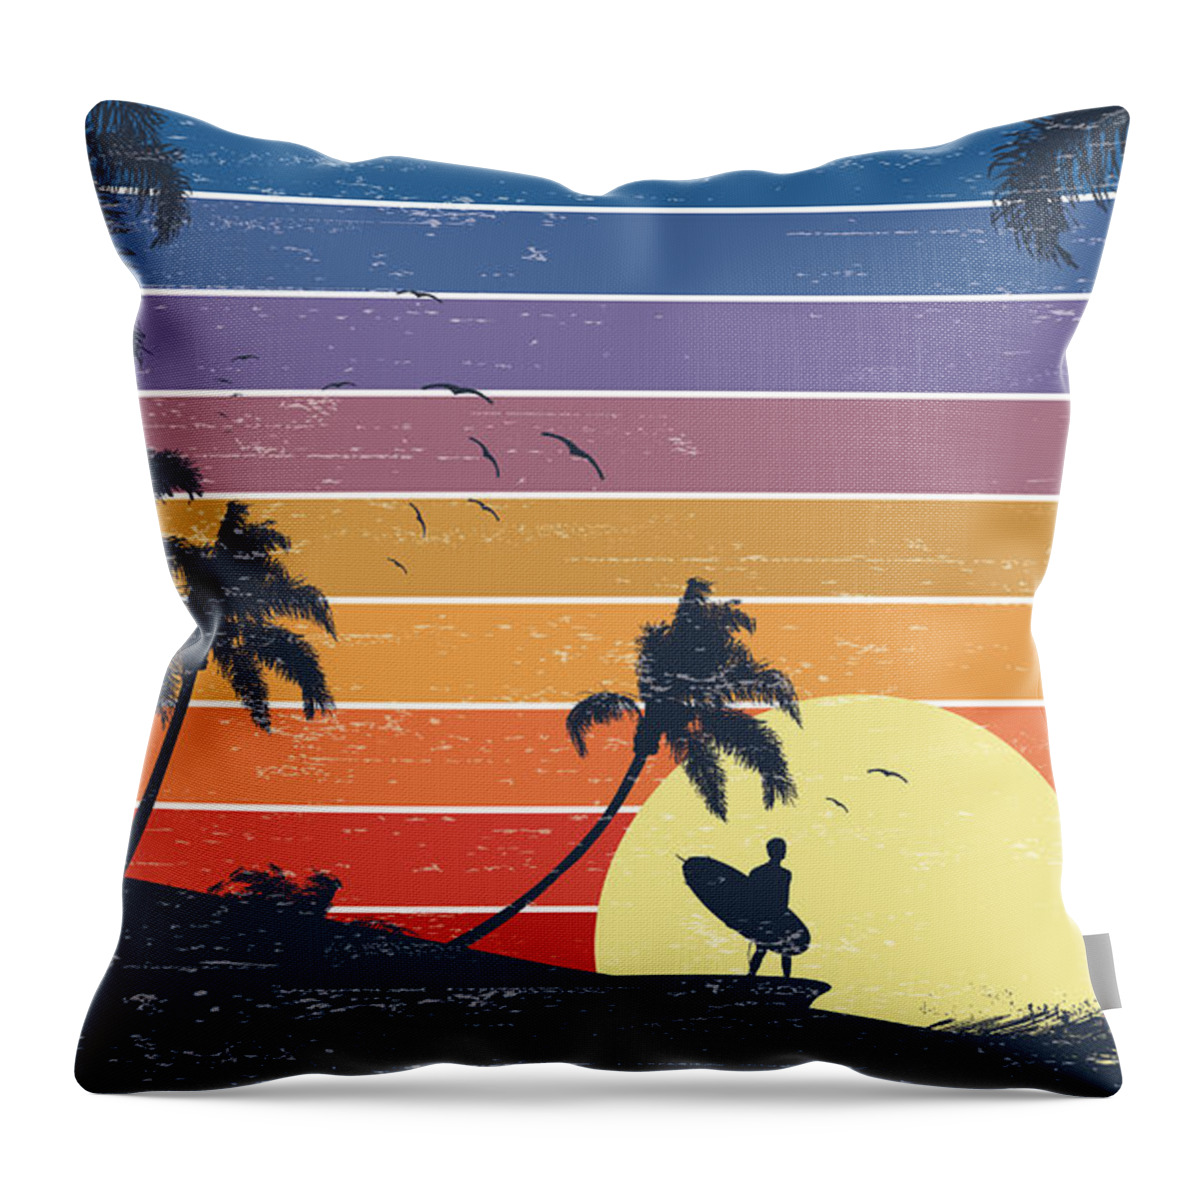 Water's Edge Throw Pillow featuring the digital art Retro Surfer Sunset by Kycstudio